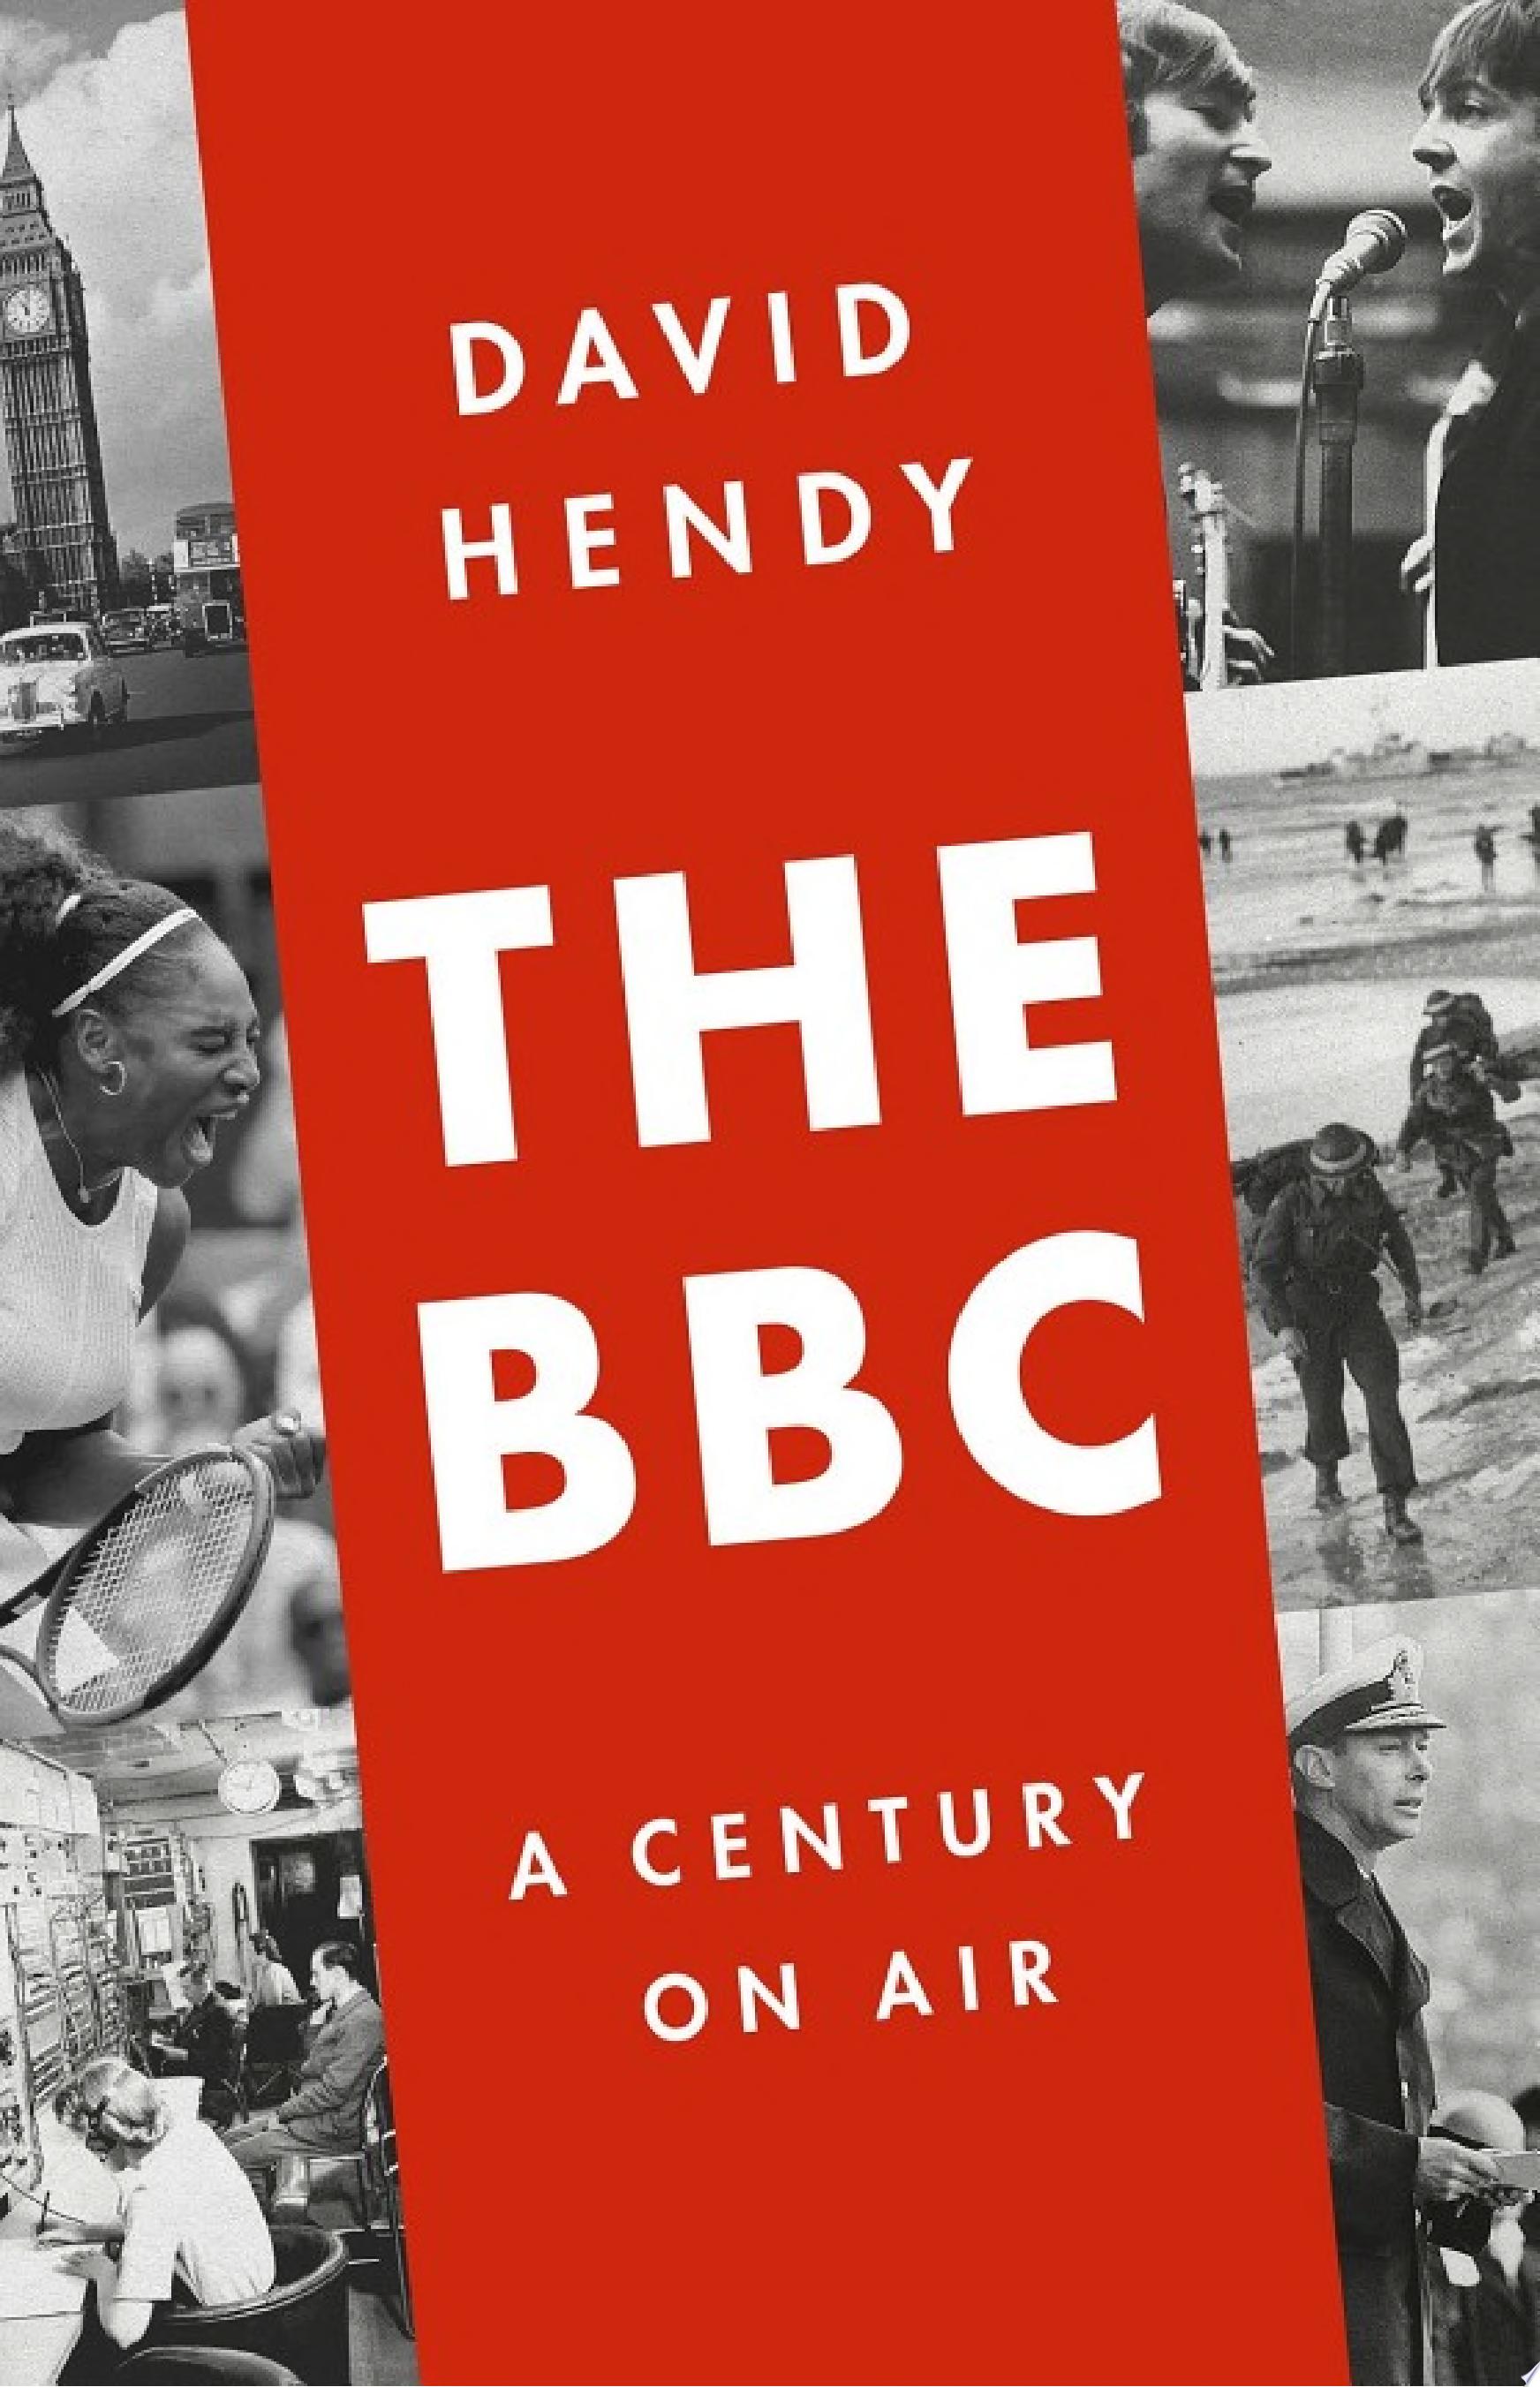 Image for "The BBC: A Century on Air"